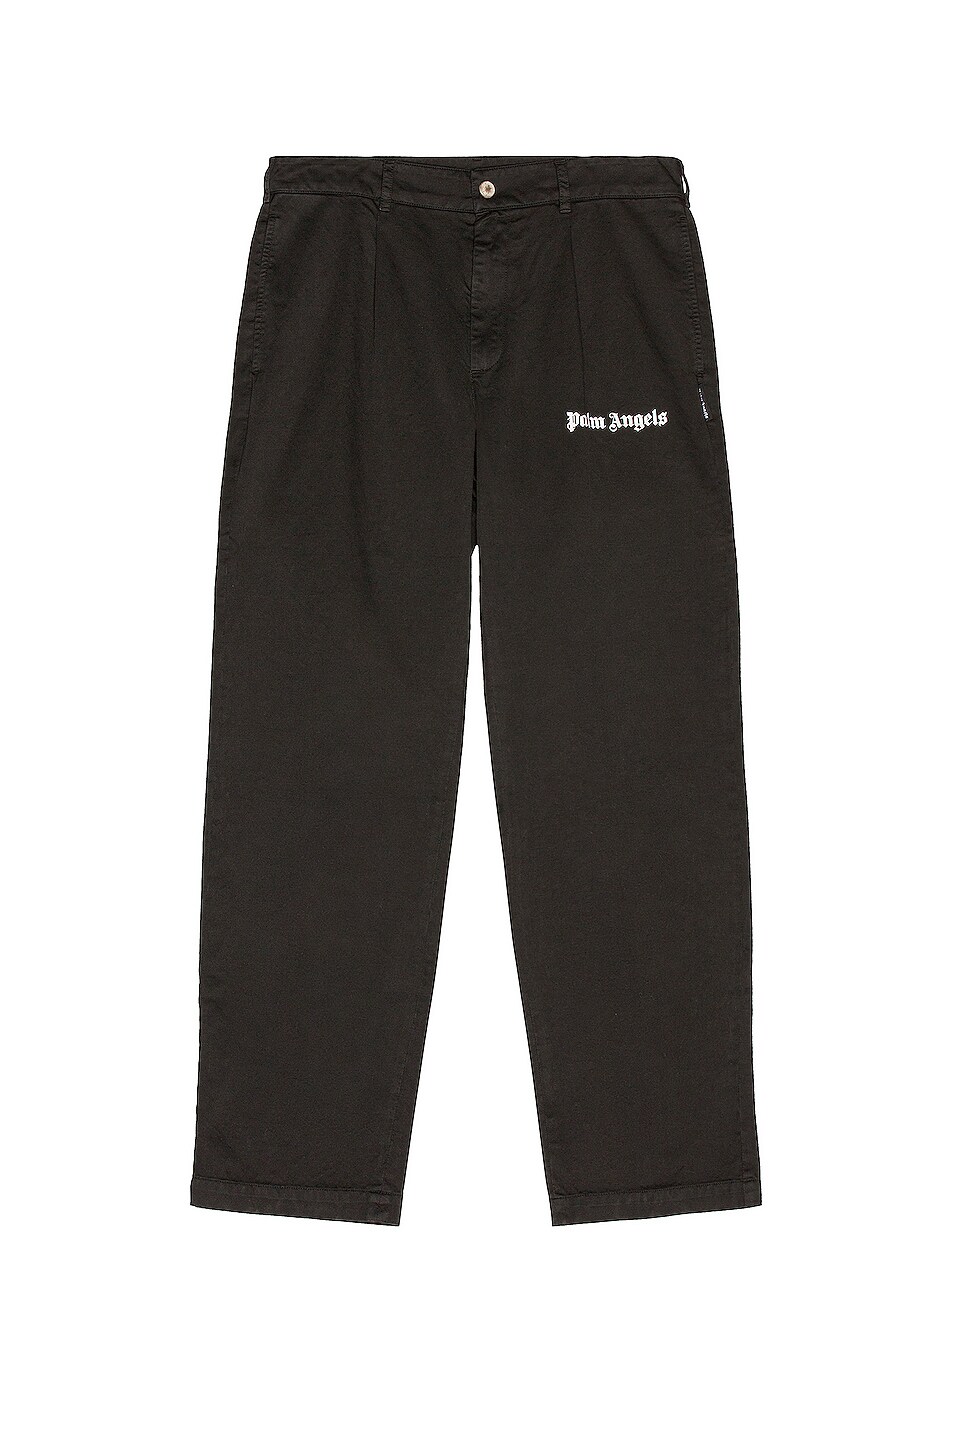 Image 1 of Palm Angels Classic Pants in Black & Black